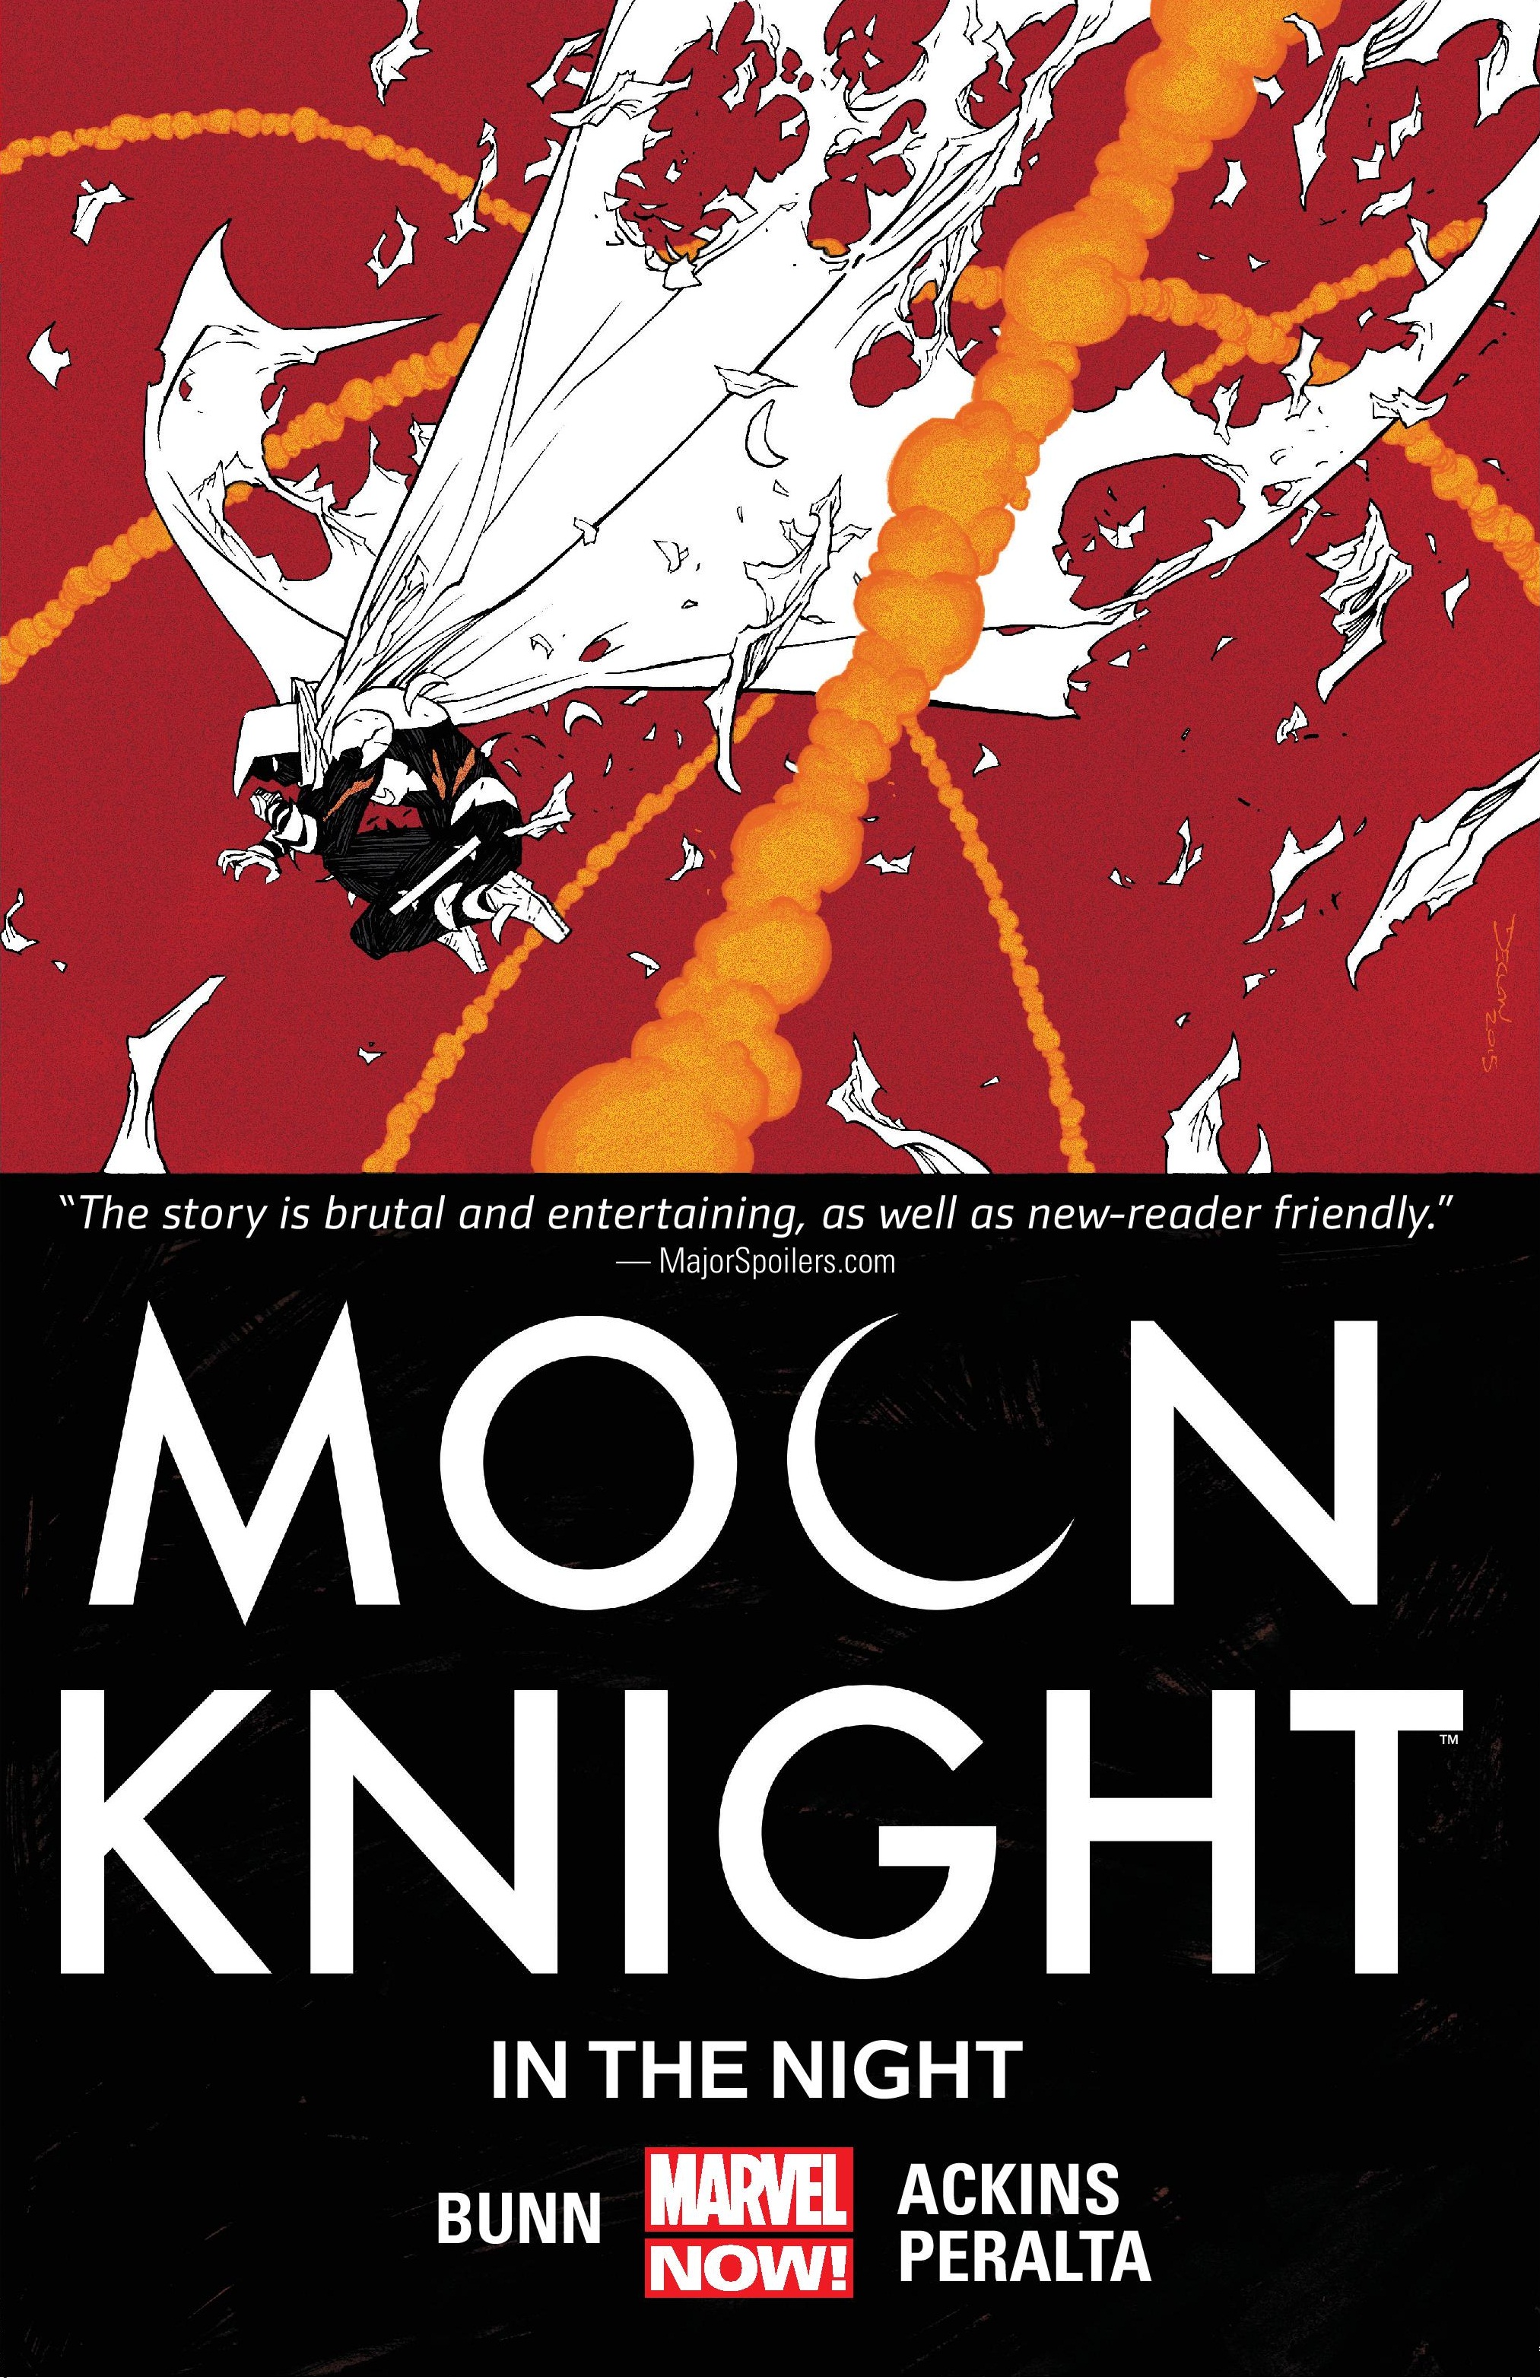 Moon Knight Vol. 3: In the Night (Trade Paperback)